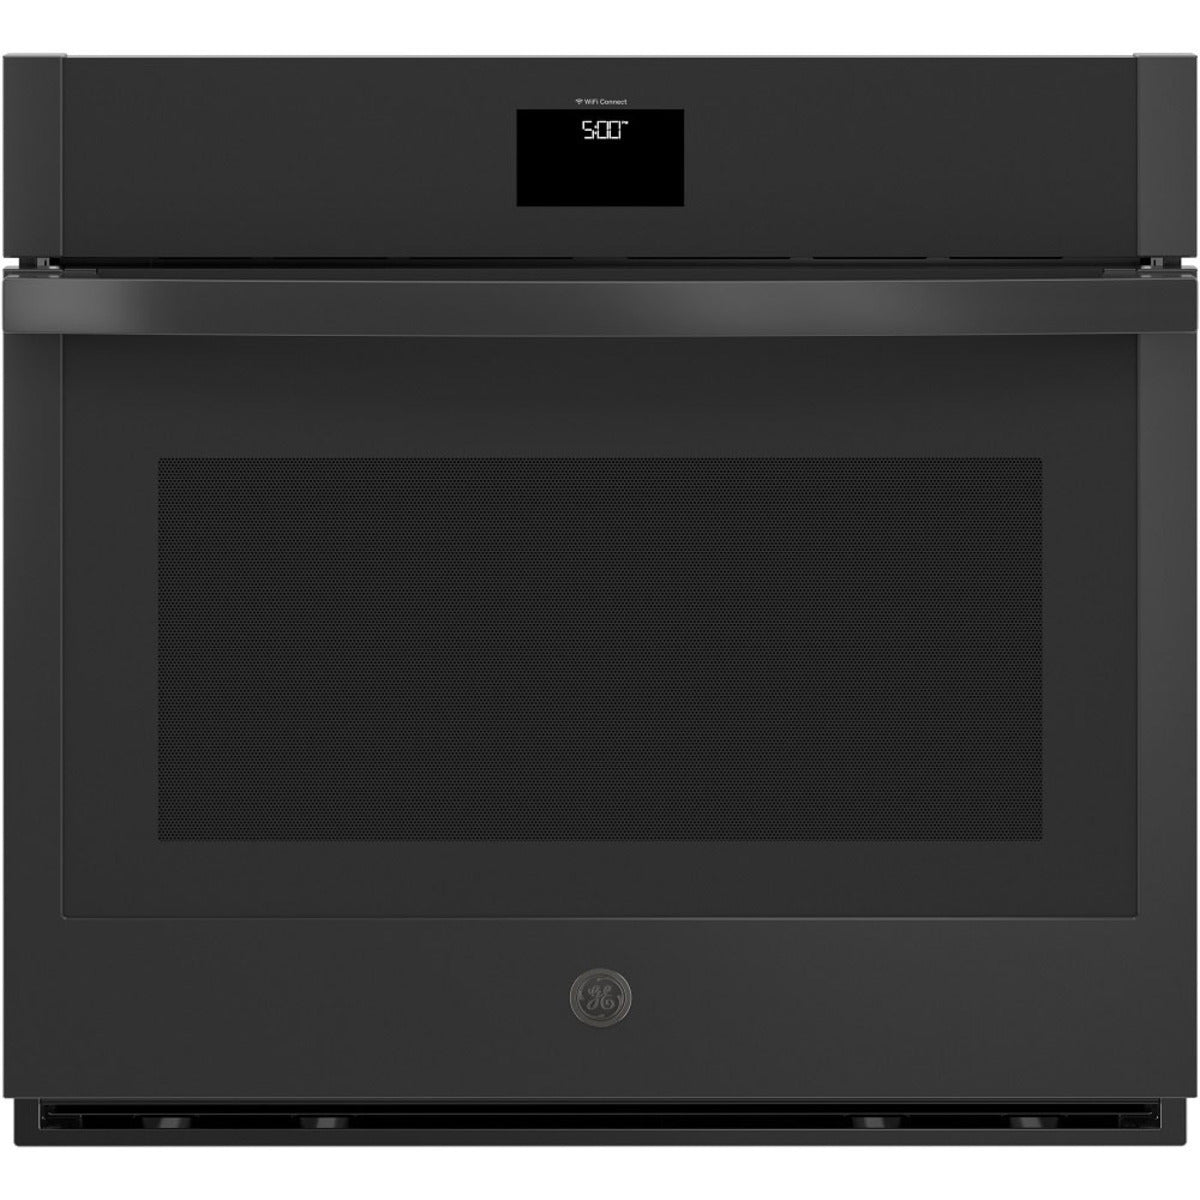 GE - 5 cu. ft Single Wall Oven in Black - JTS5000DNBB